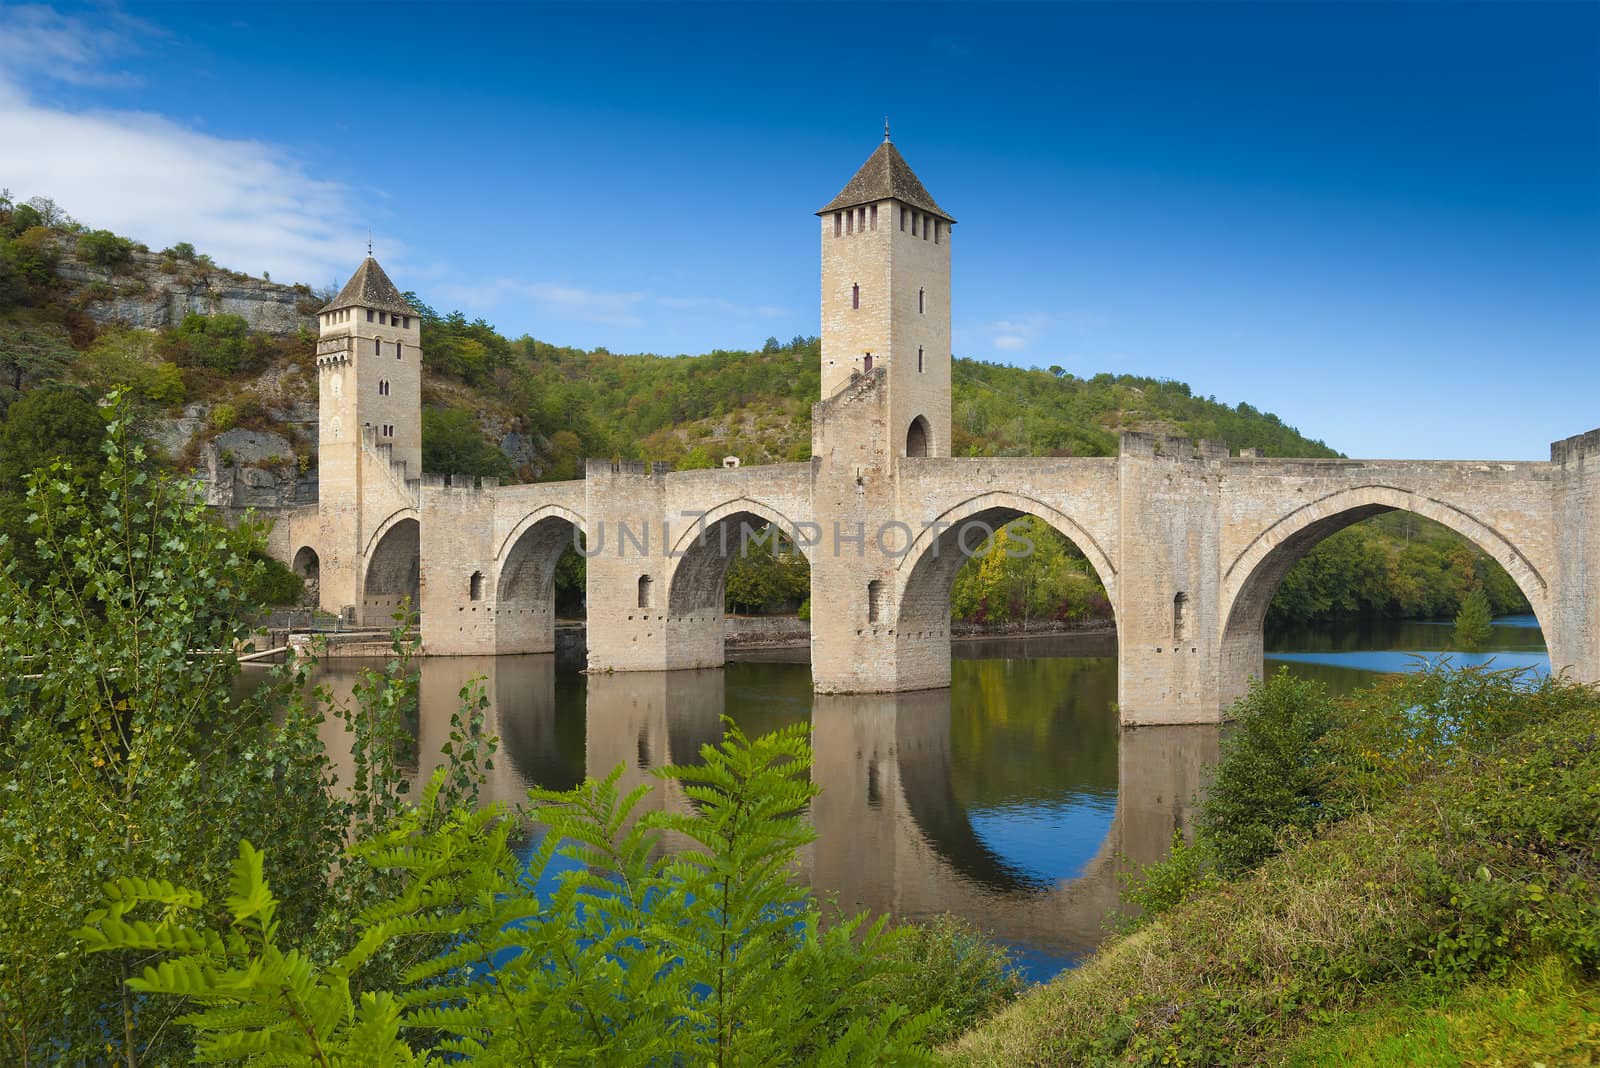 Medieval fortified bridge and toll road in Cahors, France